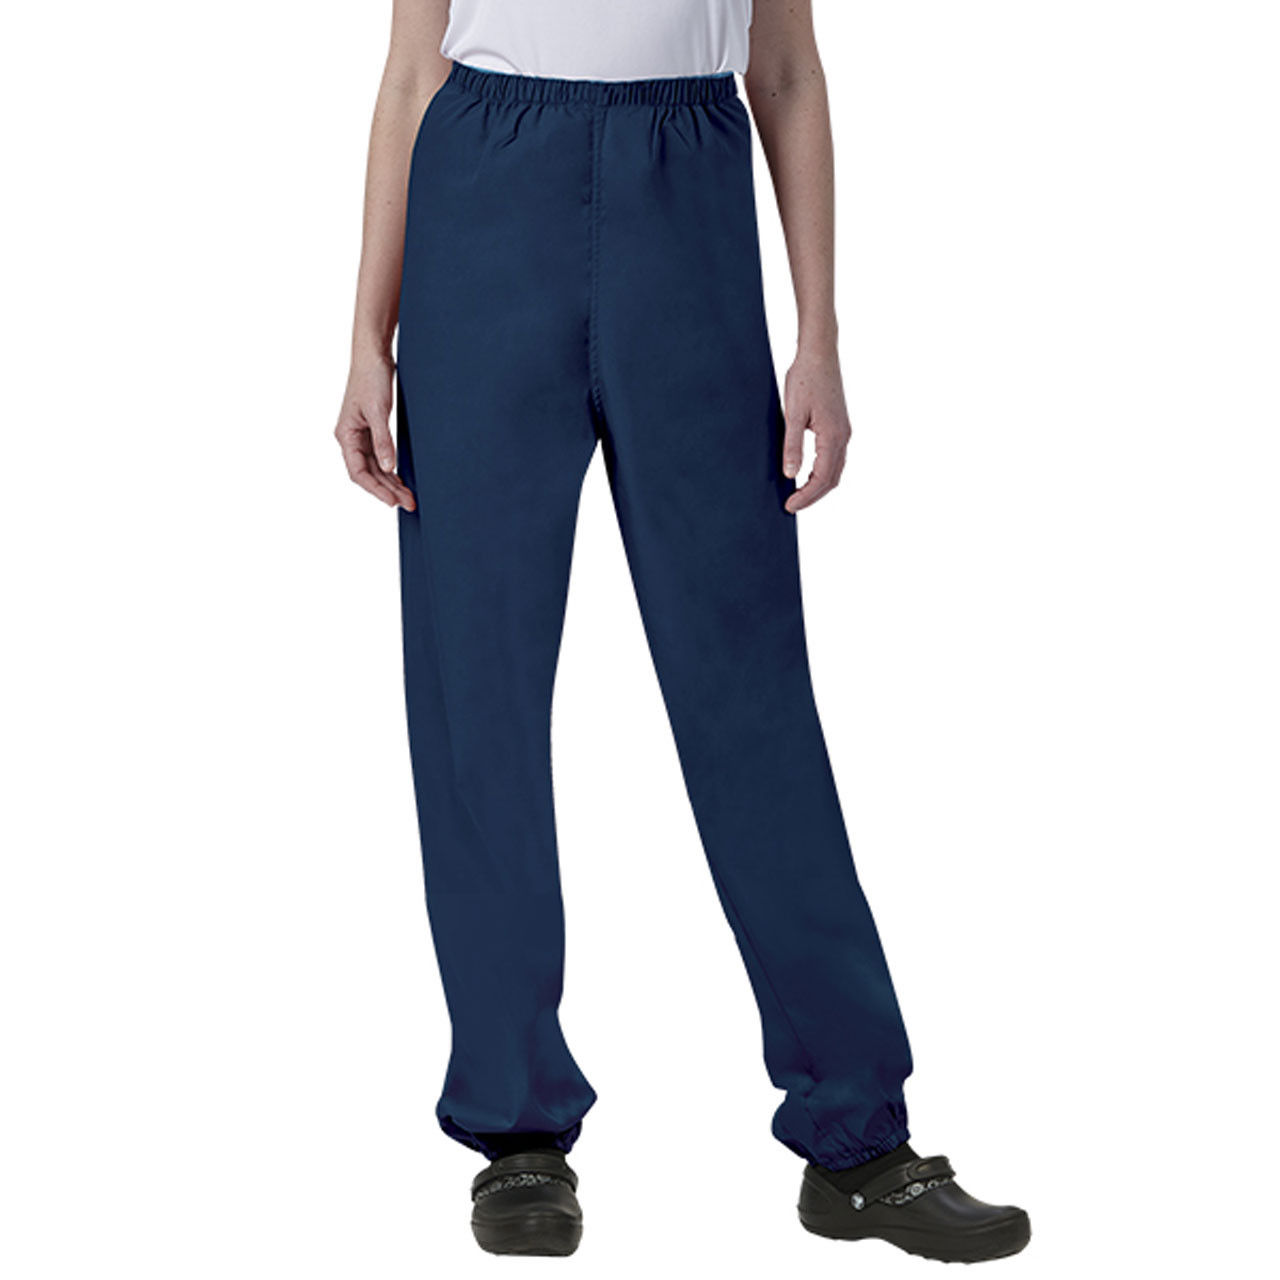 What industries are the fashion seal scrub pants ideal for?